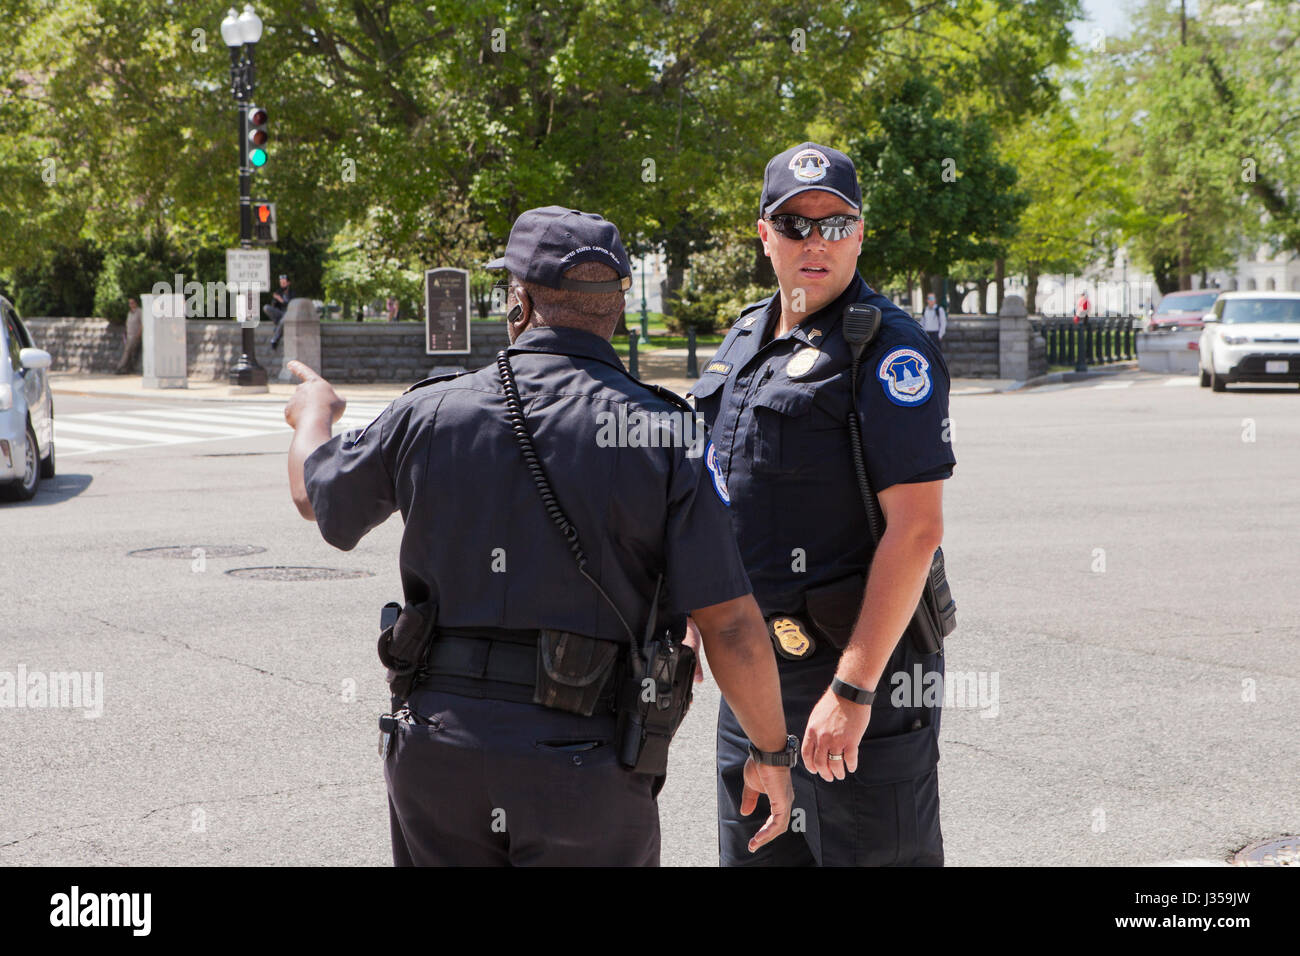 US Capitol Police officers discussing a case - Washington, DC USA Stock Photo